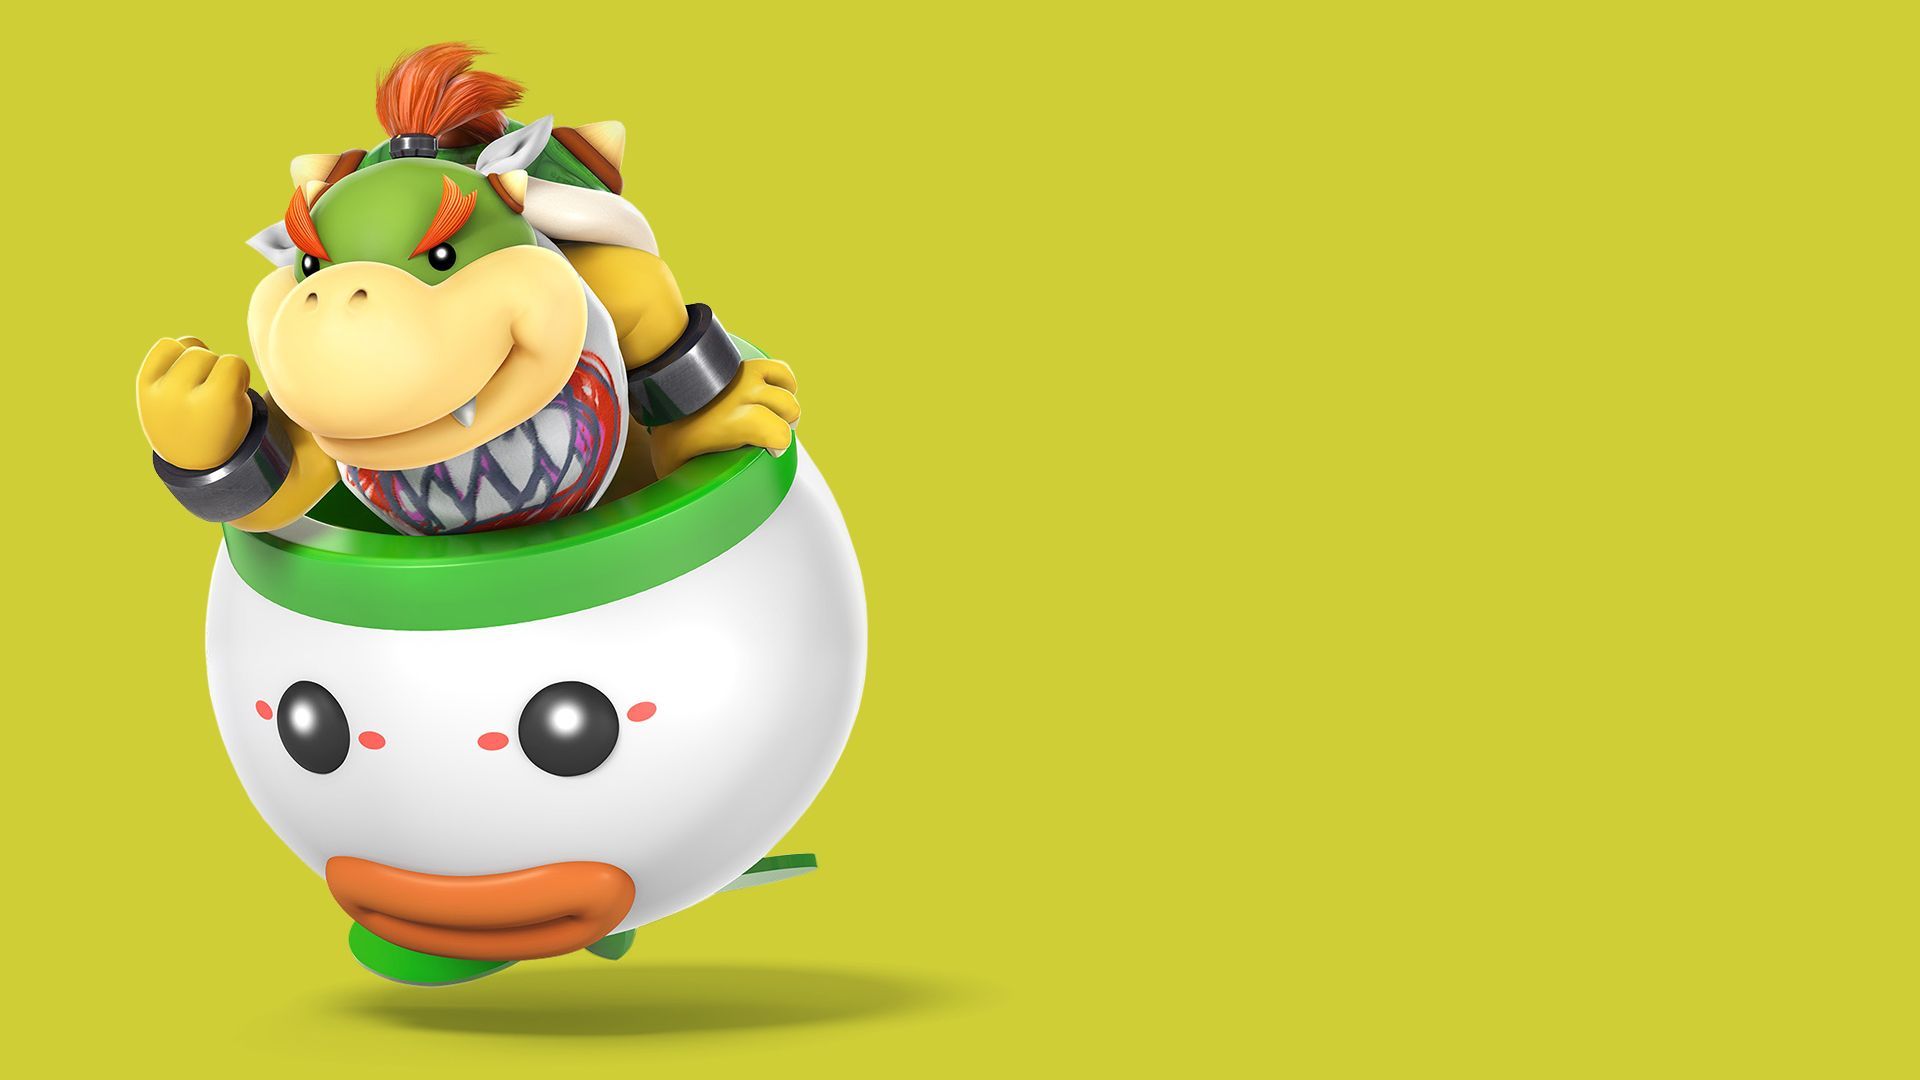 Mario Kart 8 wallpaper featuring Bowser in a green shell. - Bowser